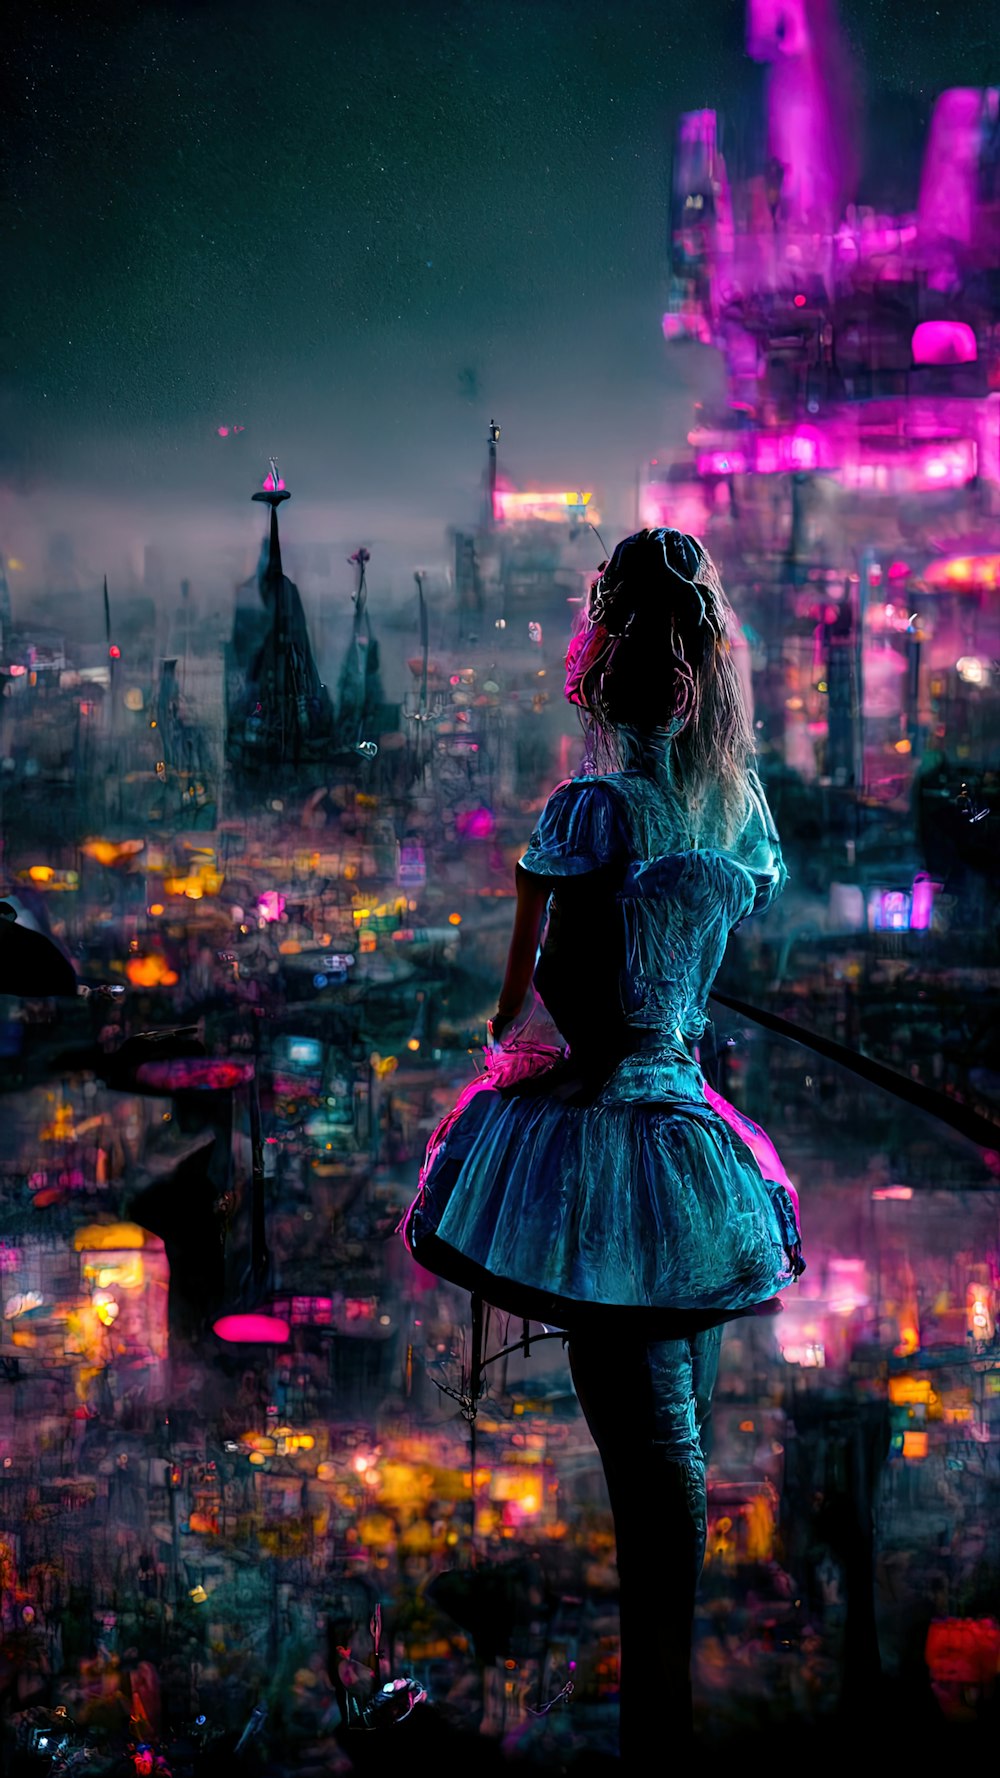 a person standing in front of a window with a city skyline in the background